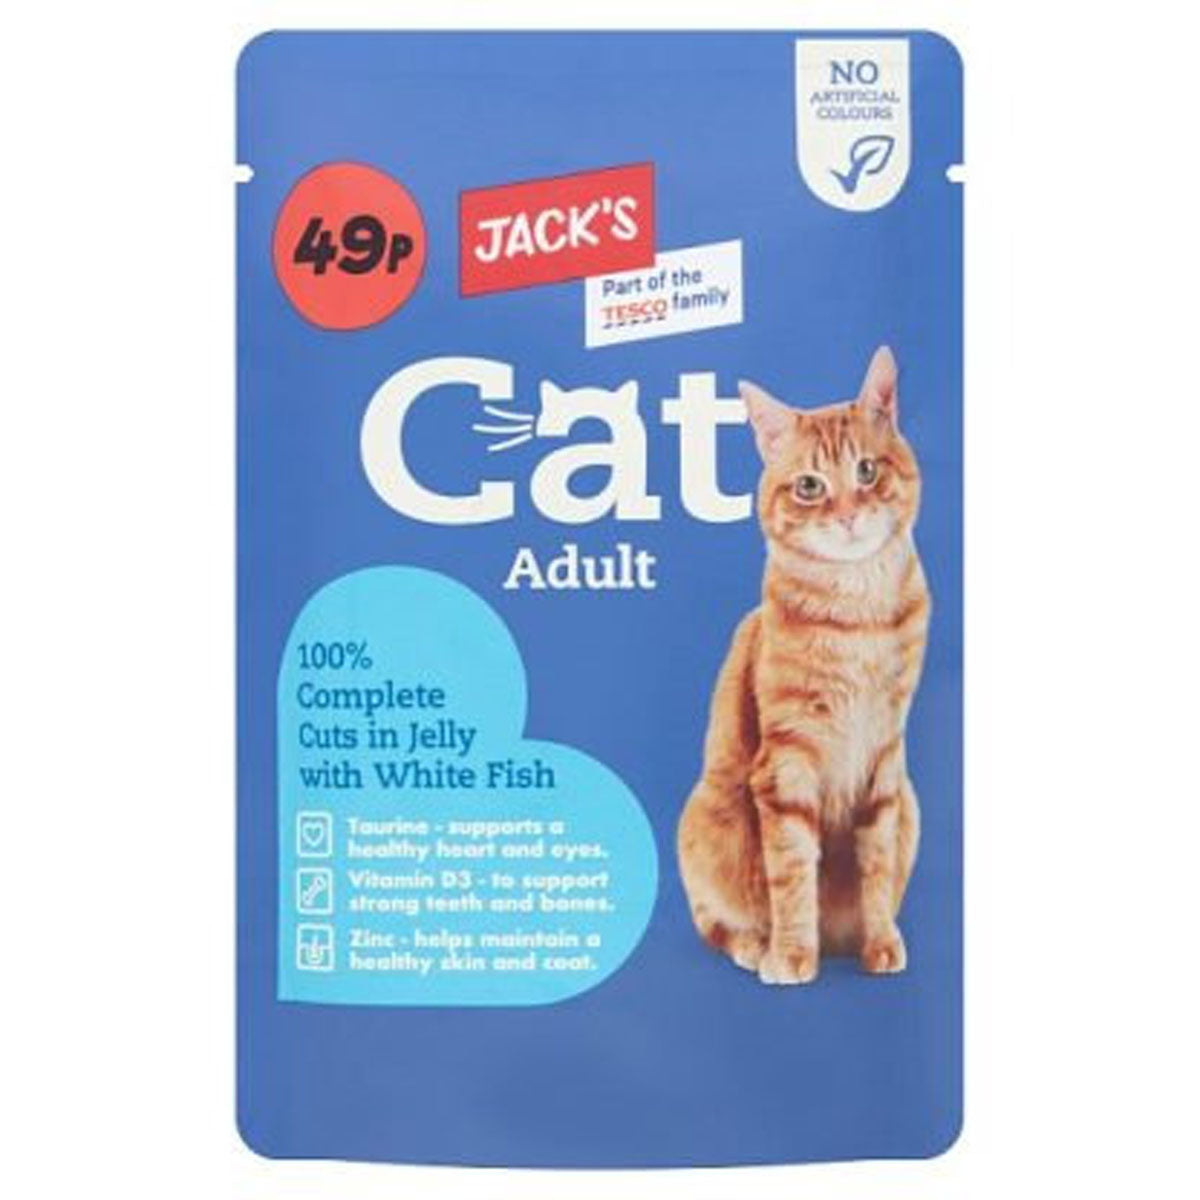 Jacks - Adult Complete Cuts in Jelly with White Fish - 100g cat food pouch.